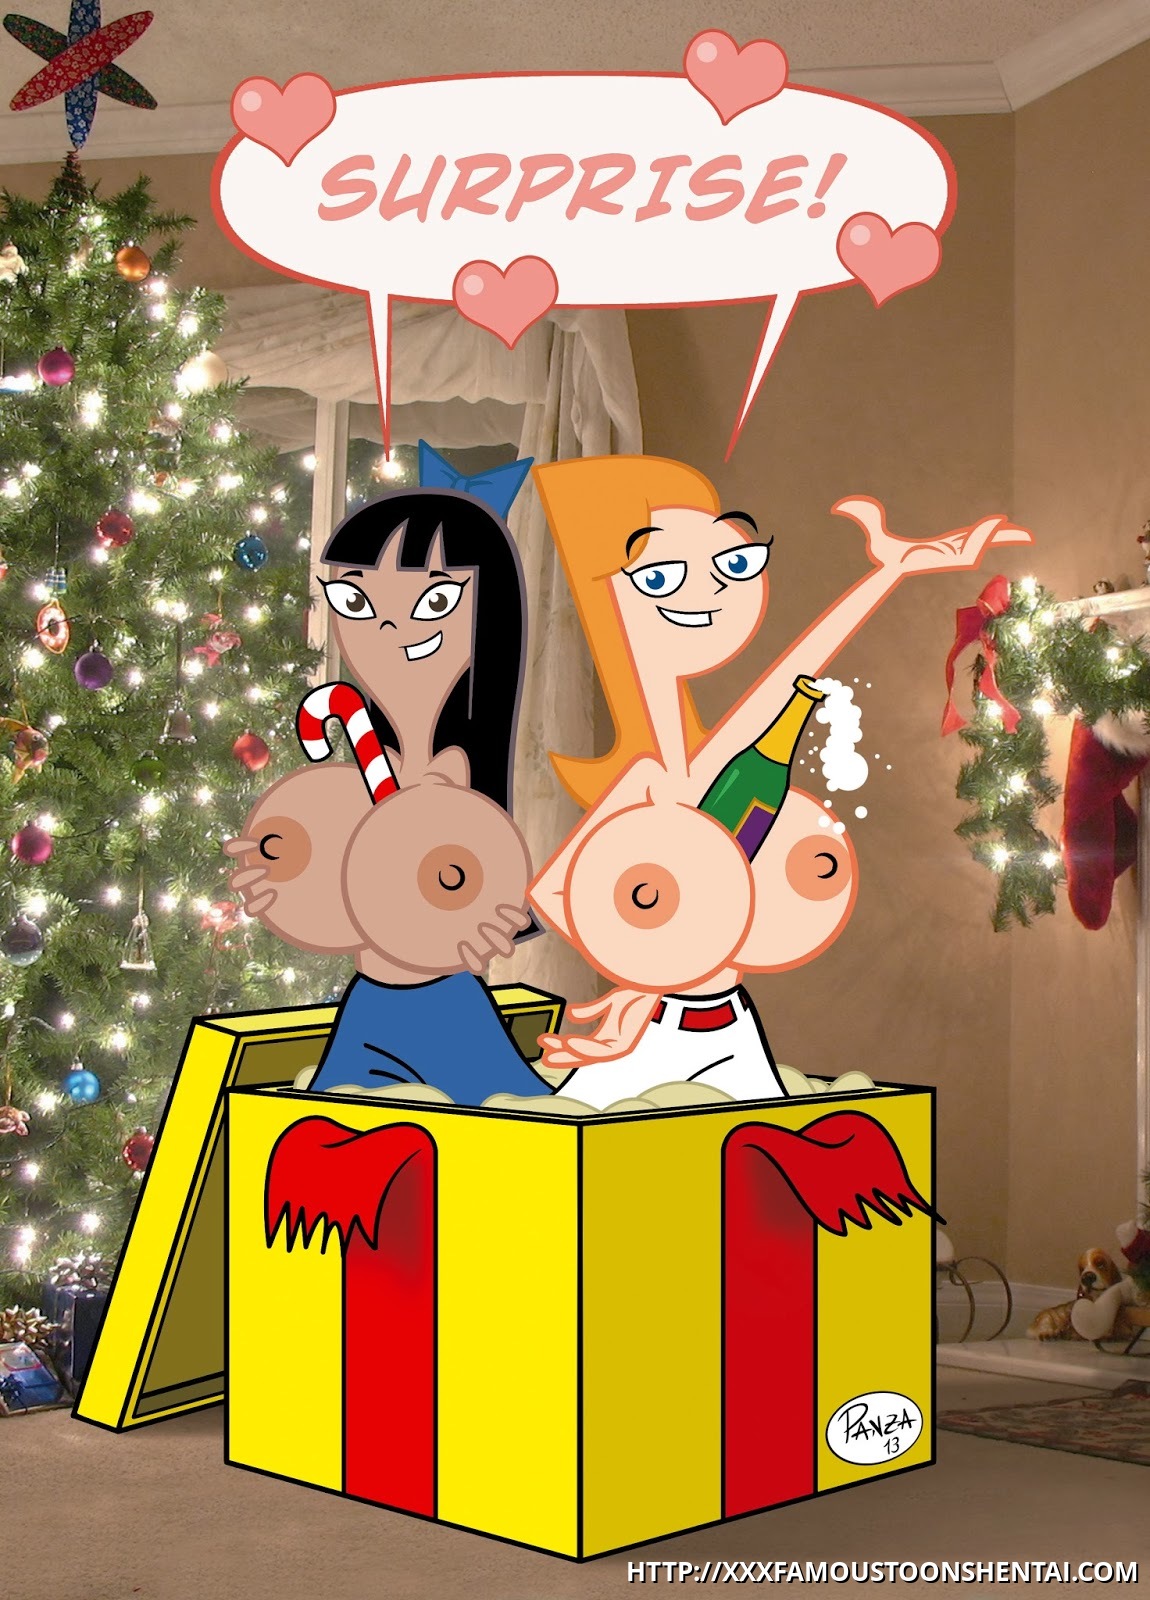 Phineas And Ferb Lesbians Comics - Candace Flynn and Stacy Hirano busty surprise â€“ Phineas and Ferb Cartoon Sex